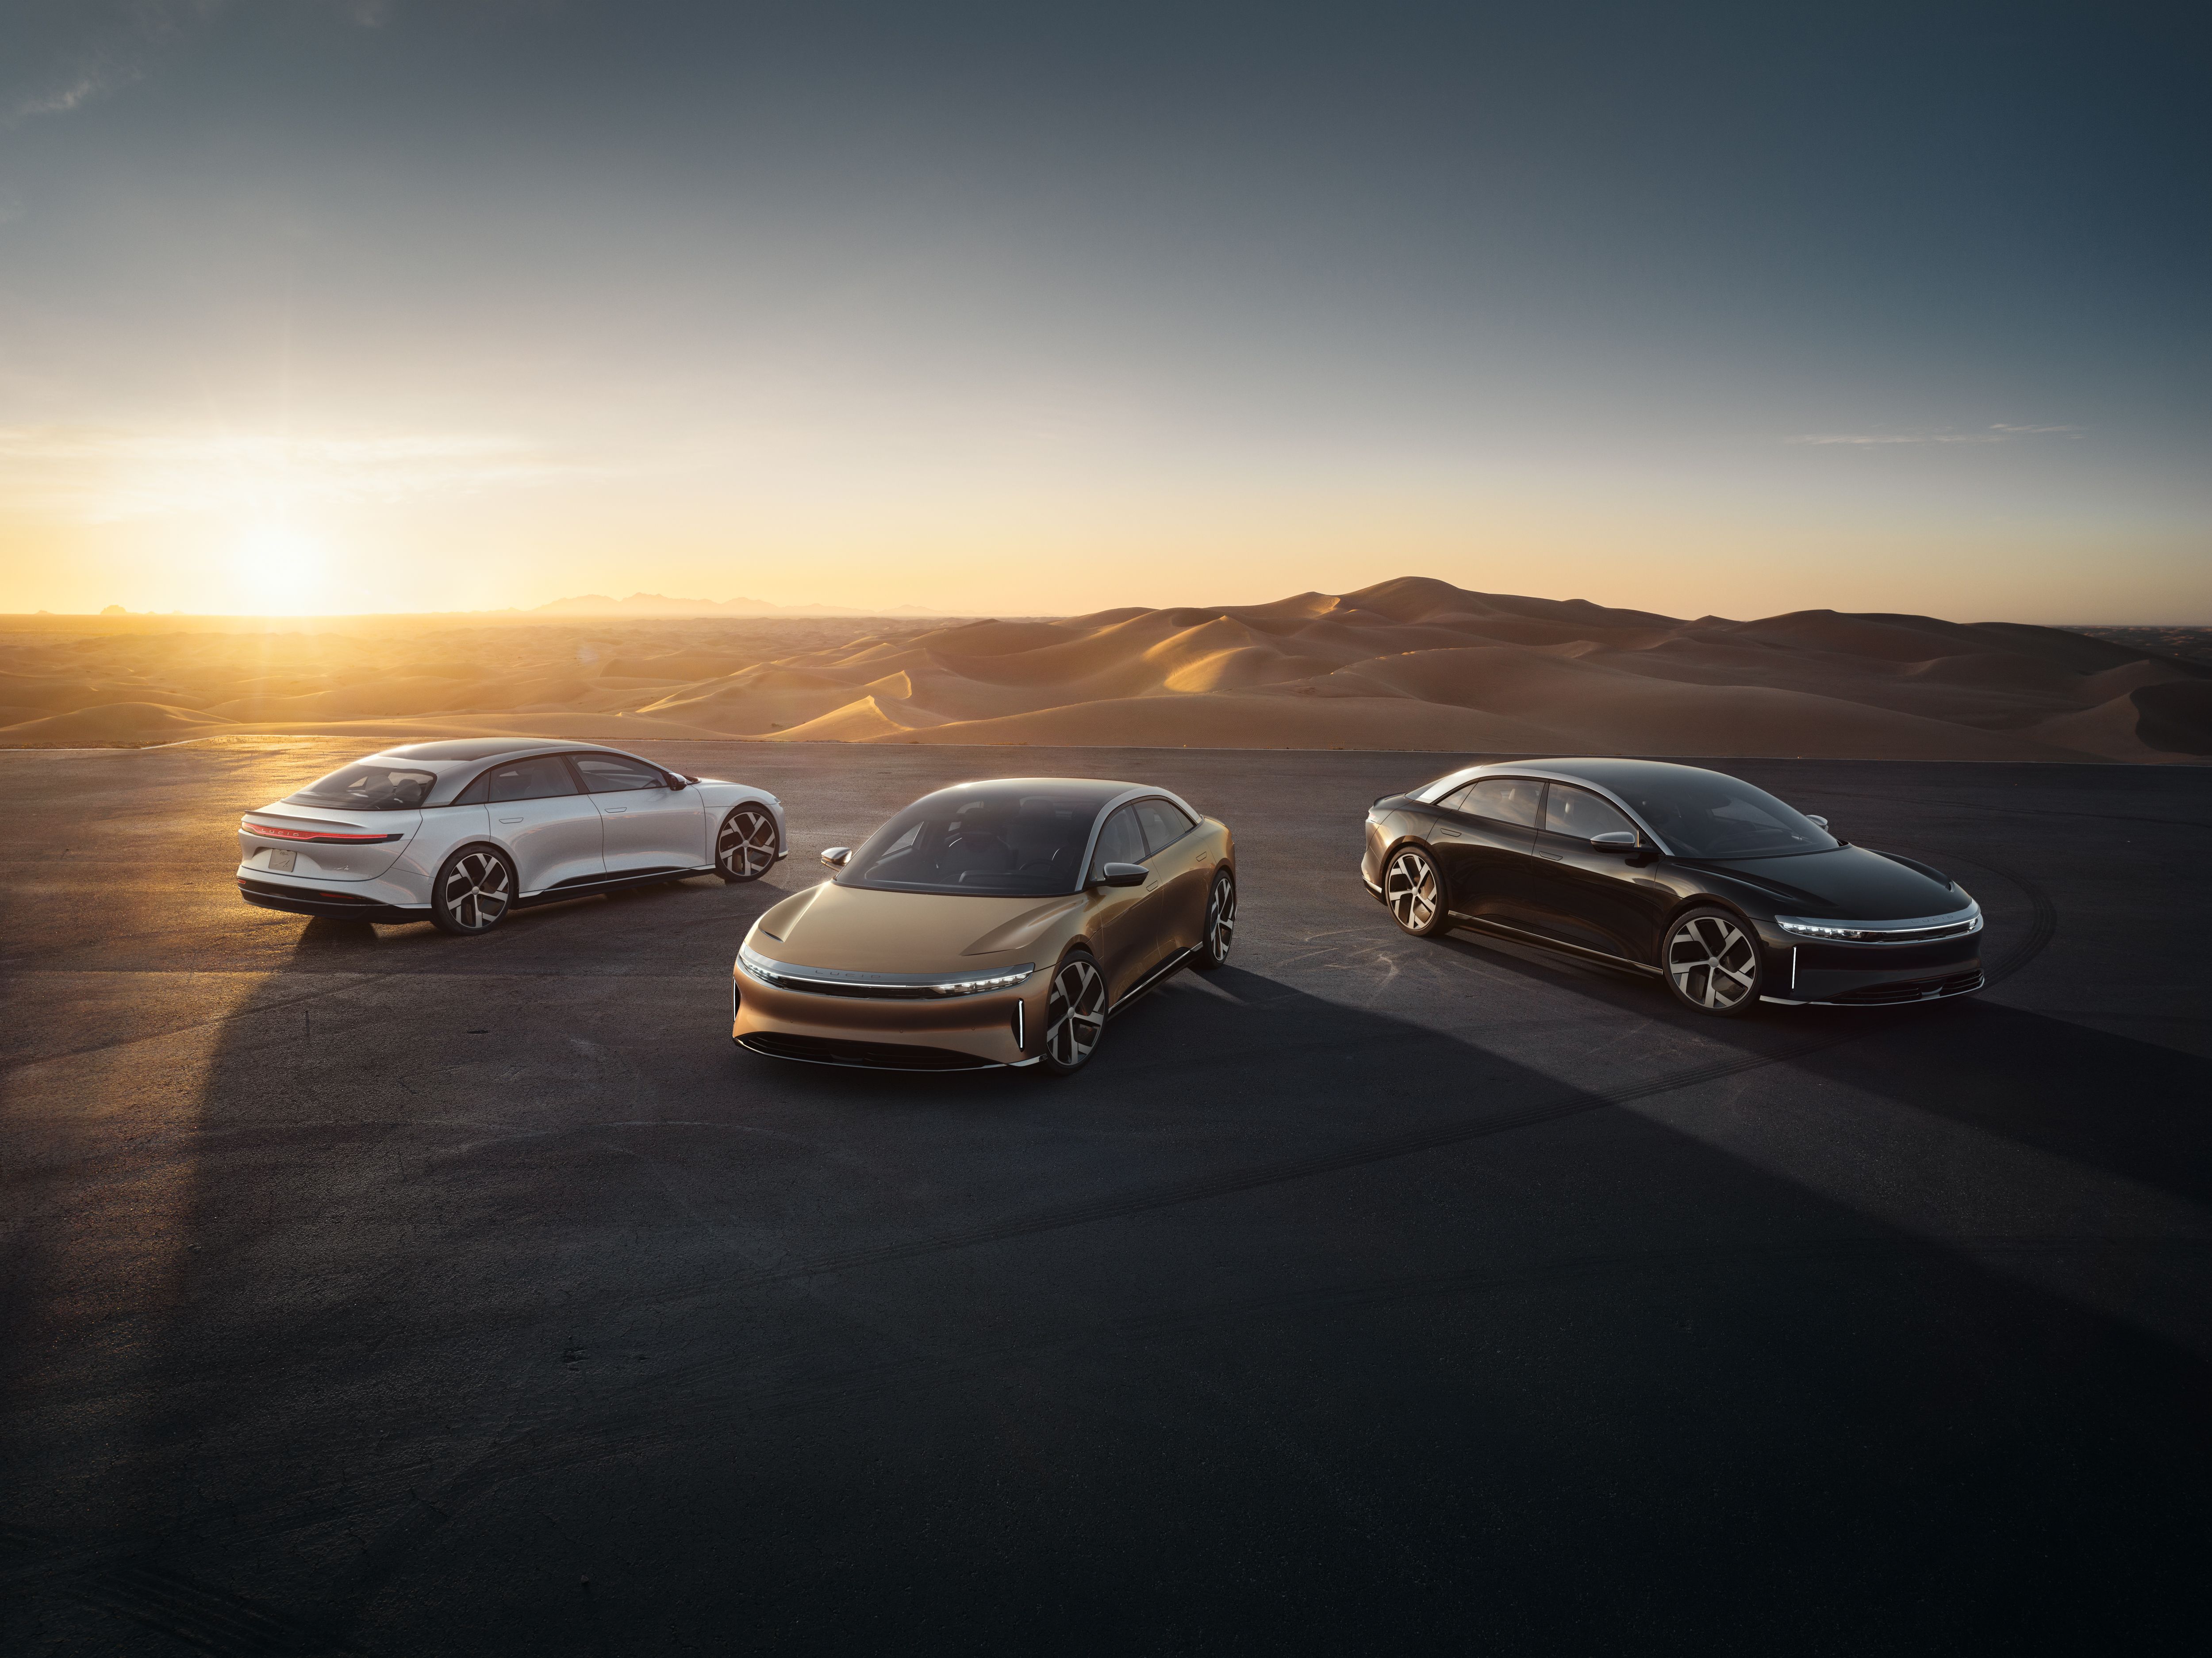 The Lucid Air Models.